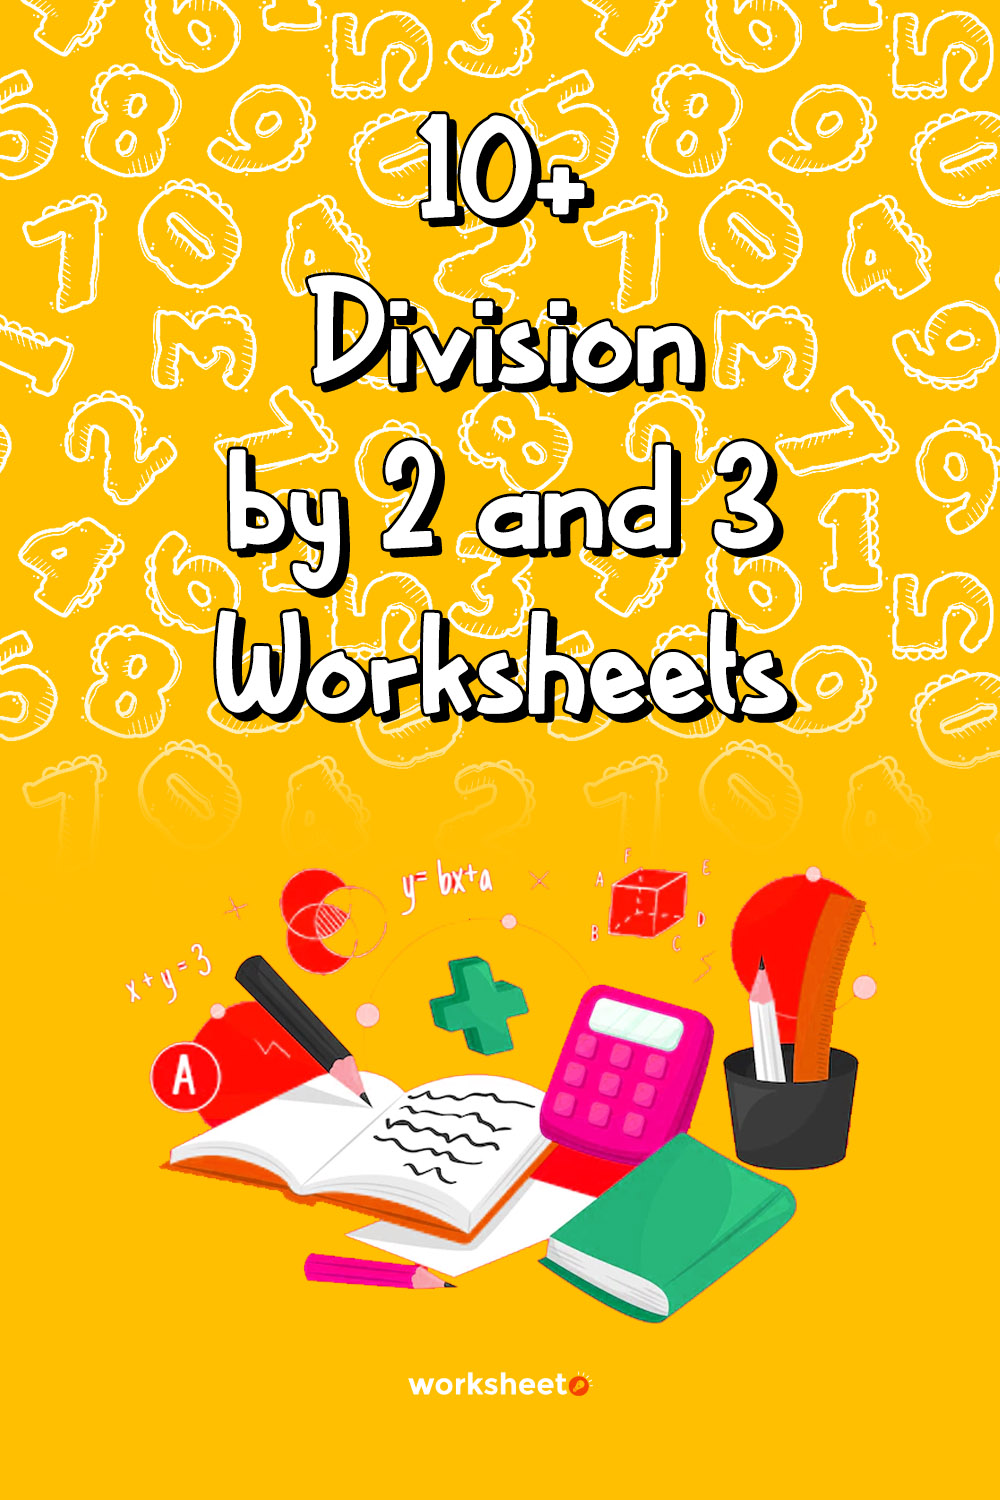 13 Images of Division By 2 And 3 Worksheets